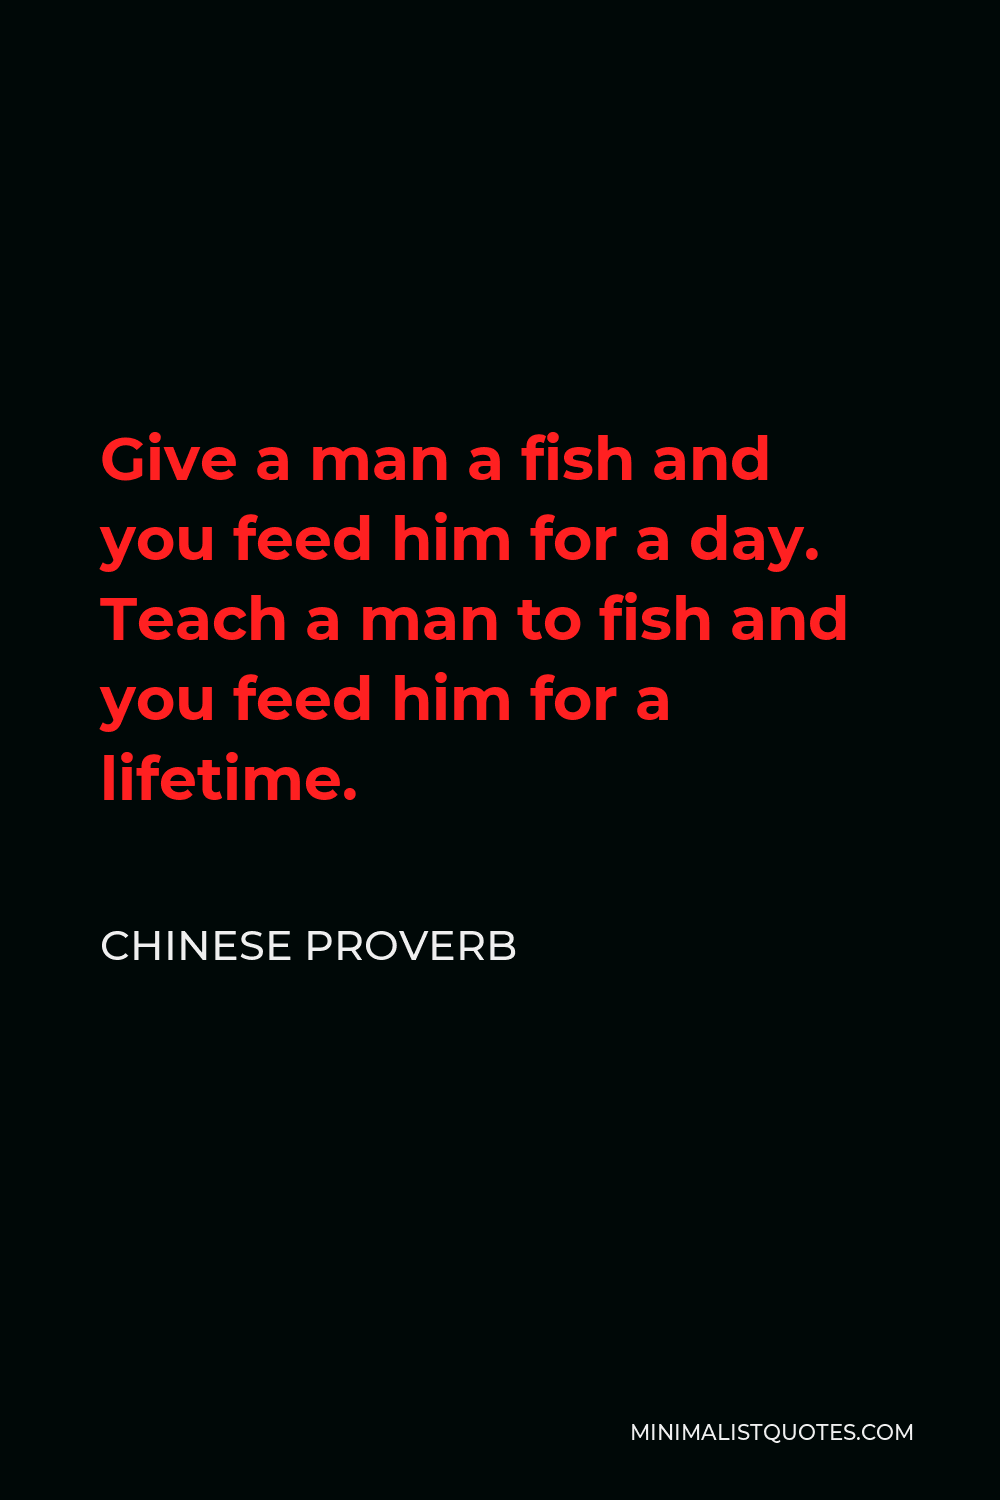 Chinese Proverb Quote - Give a man a fish and you feed him for a day. Teach a man to fish and you feed him for a lifetime.